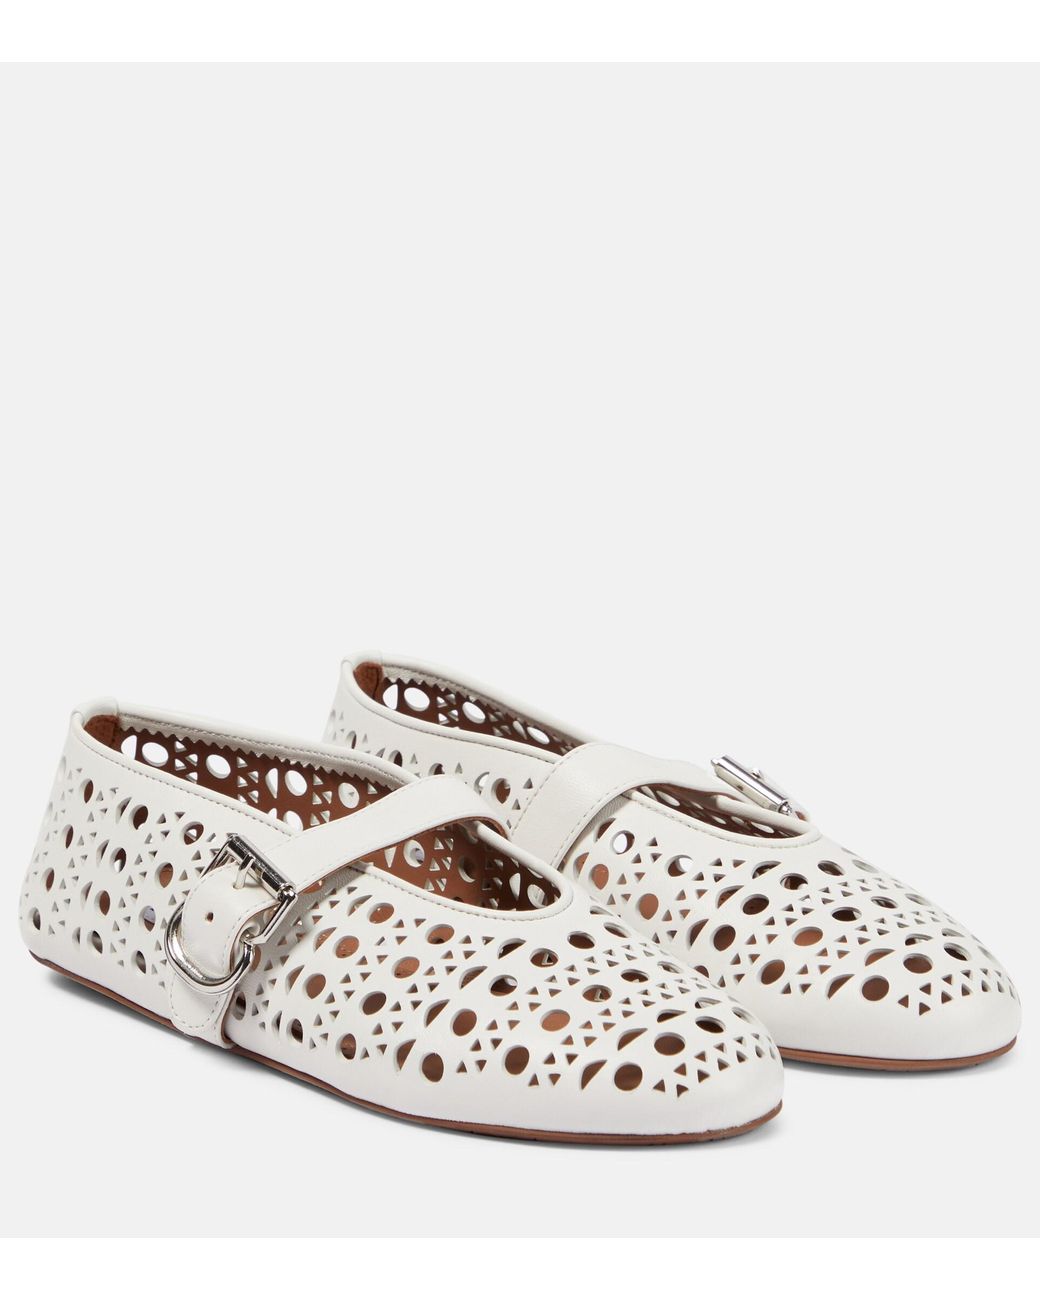 Alaïa Vienne Leather Ballet Flats in White | Lyst